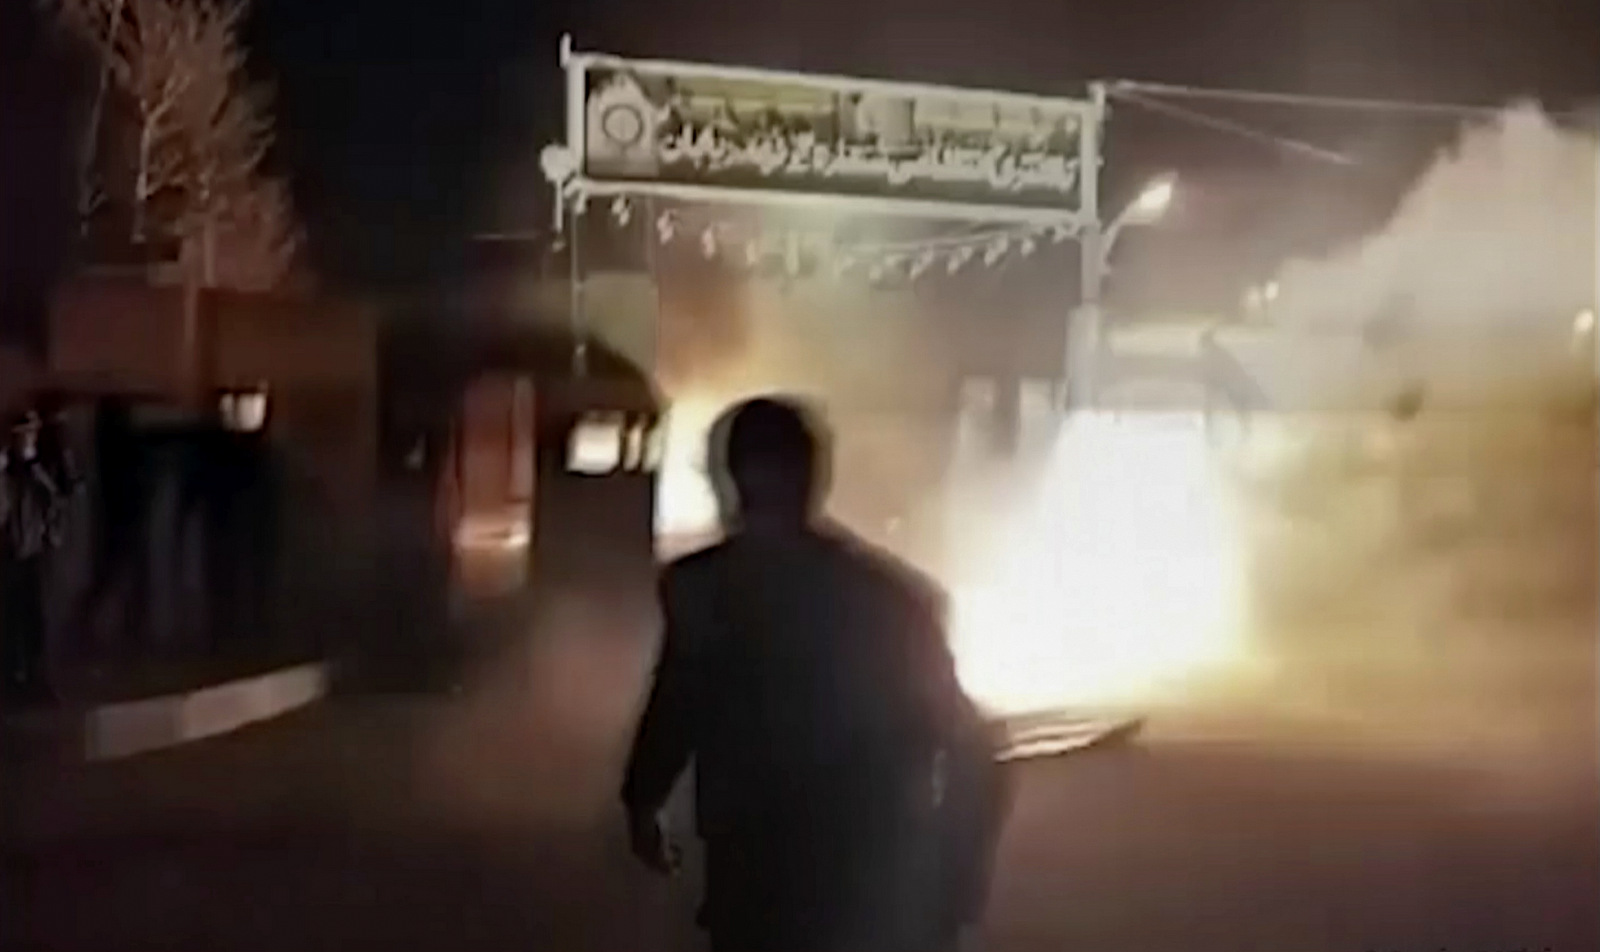 This frame grab from video shows an attack on an Iranian police station in Qahdarijan, Iran, Jan. 2, 2018. Six rioters were killed during the attack on the police station, according to Iranian state TV. It reported that clashes were sparked by rioters who tried to steal guns from the police station.